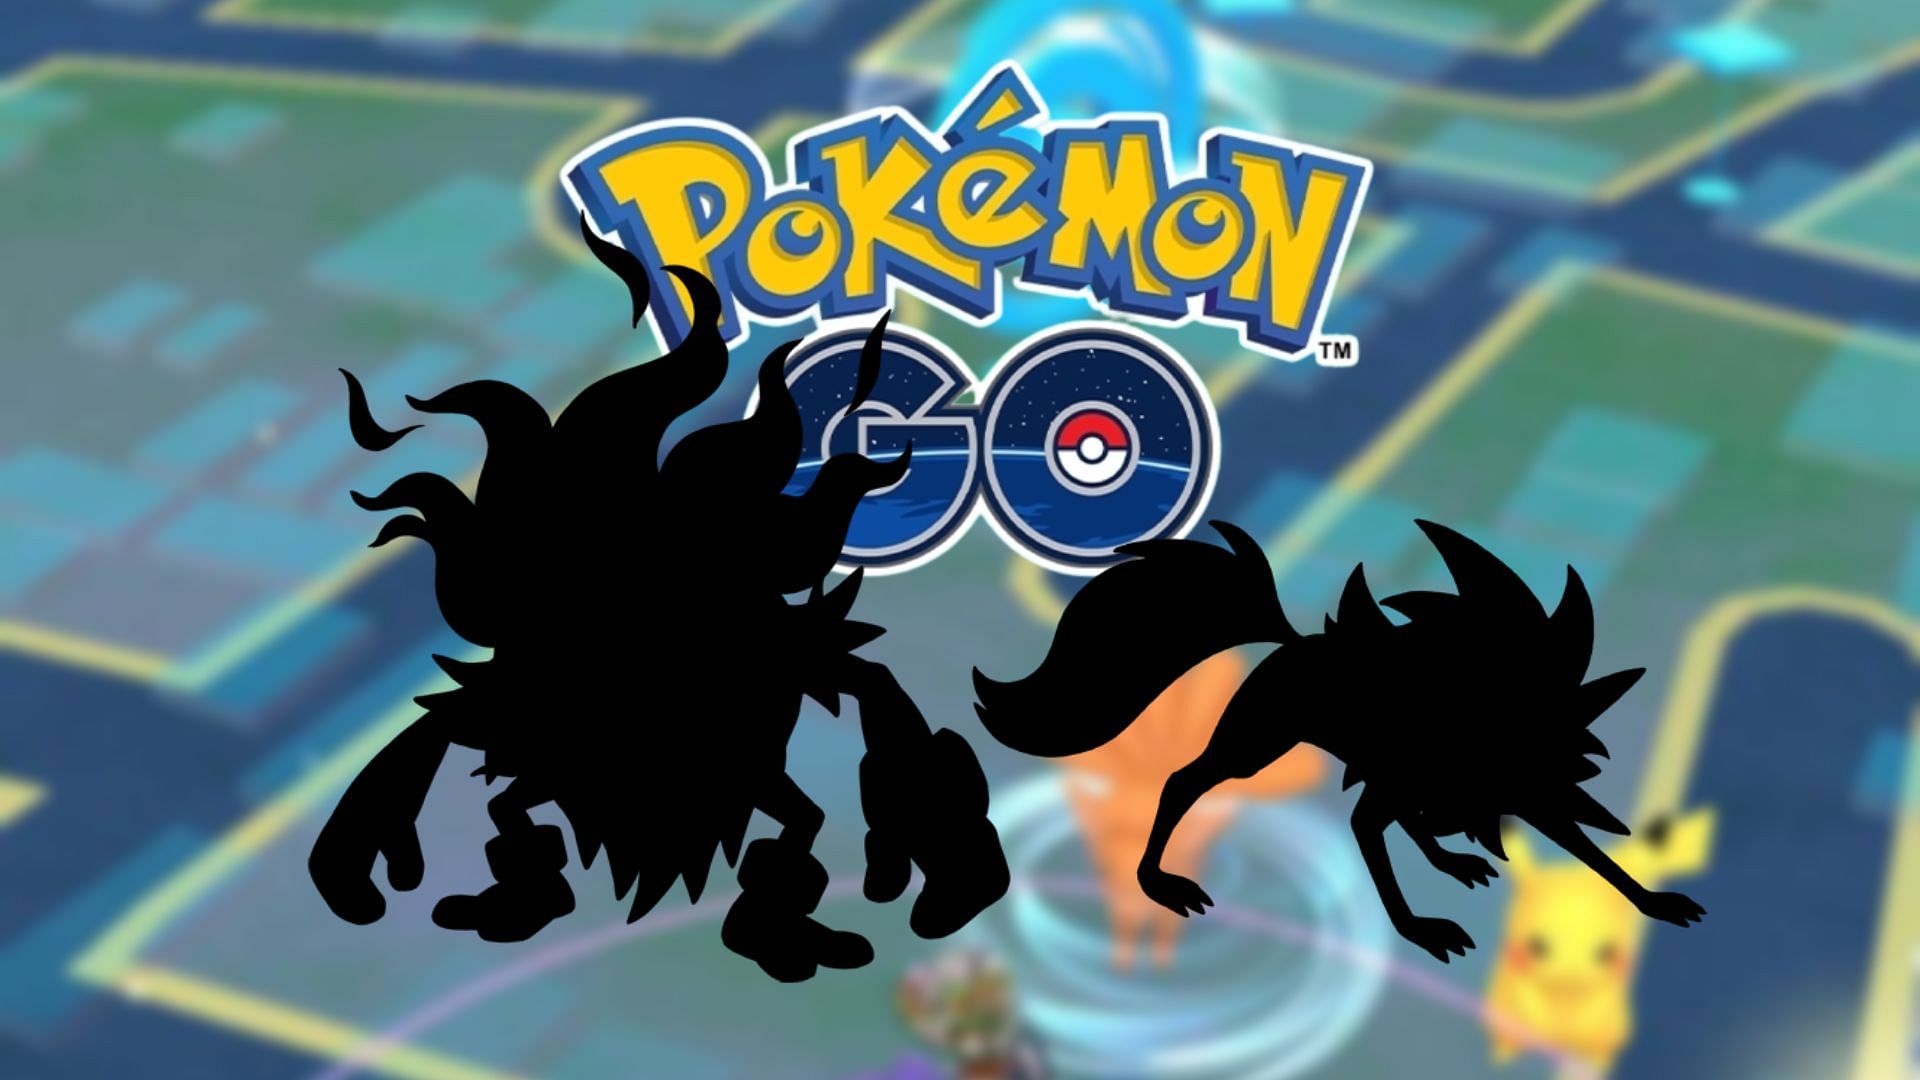 Massively on the Go: Pokemon Go's July events have mostly leaked already